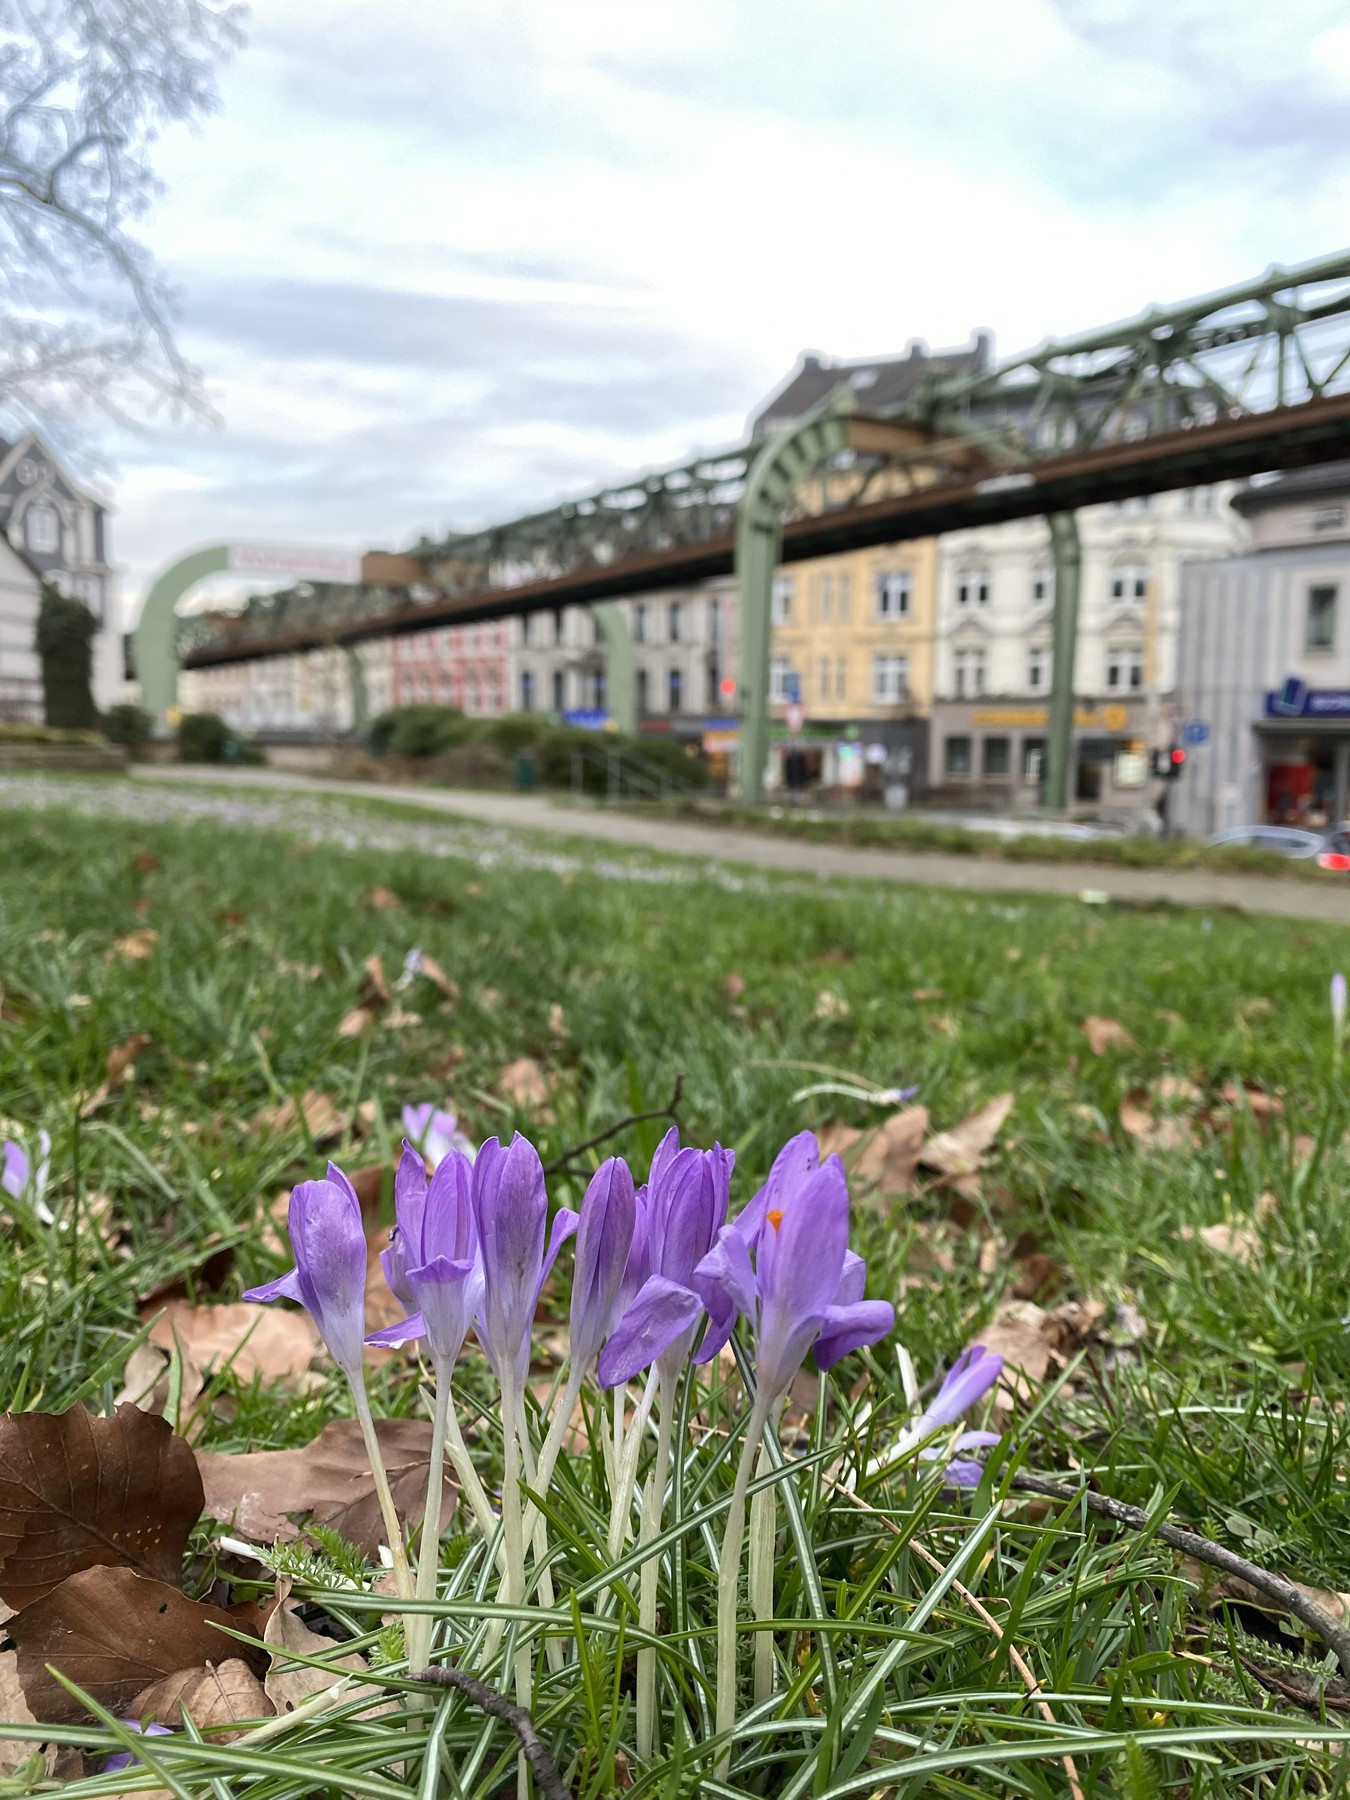 Flowers in Wuppertal, Germany, with view on the Schewebebahn in the background